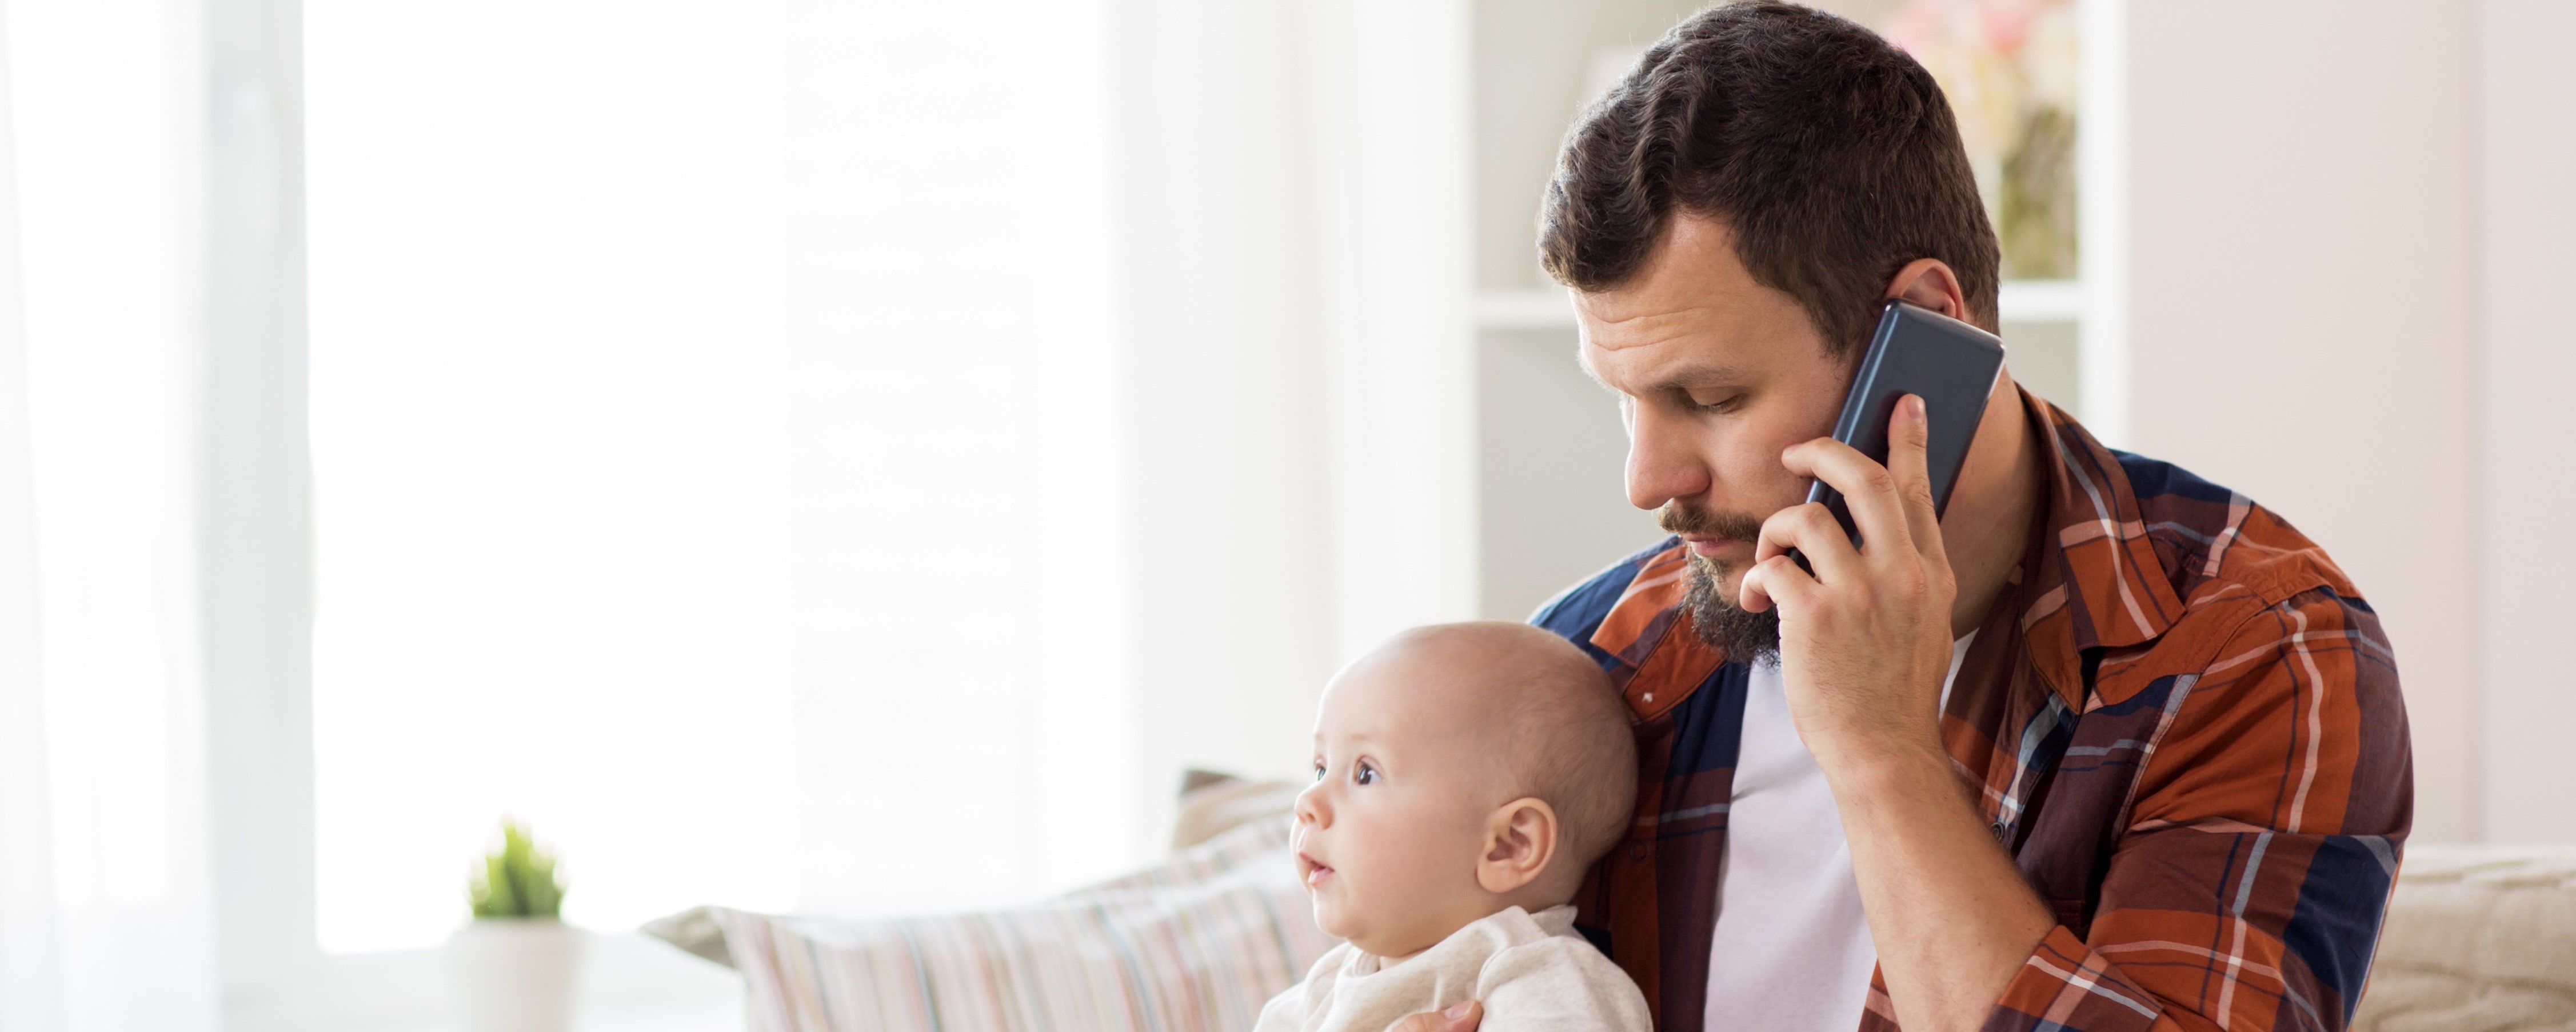 Father with baby making a telephone call.